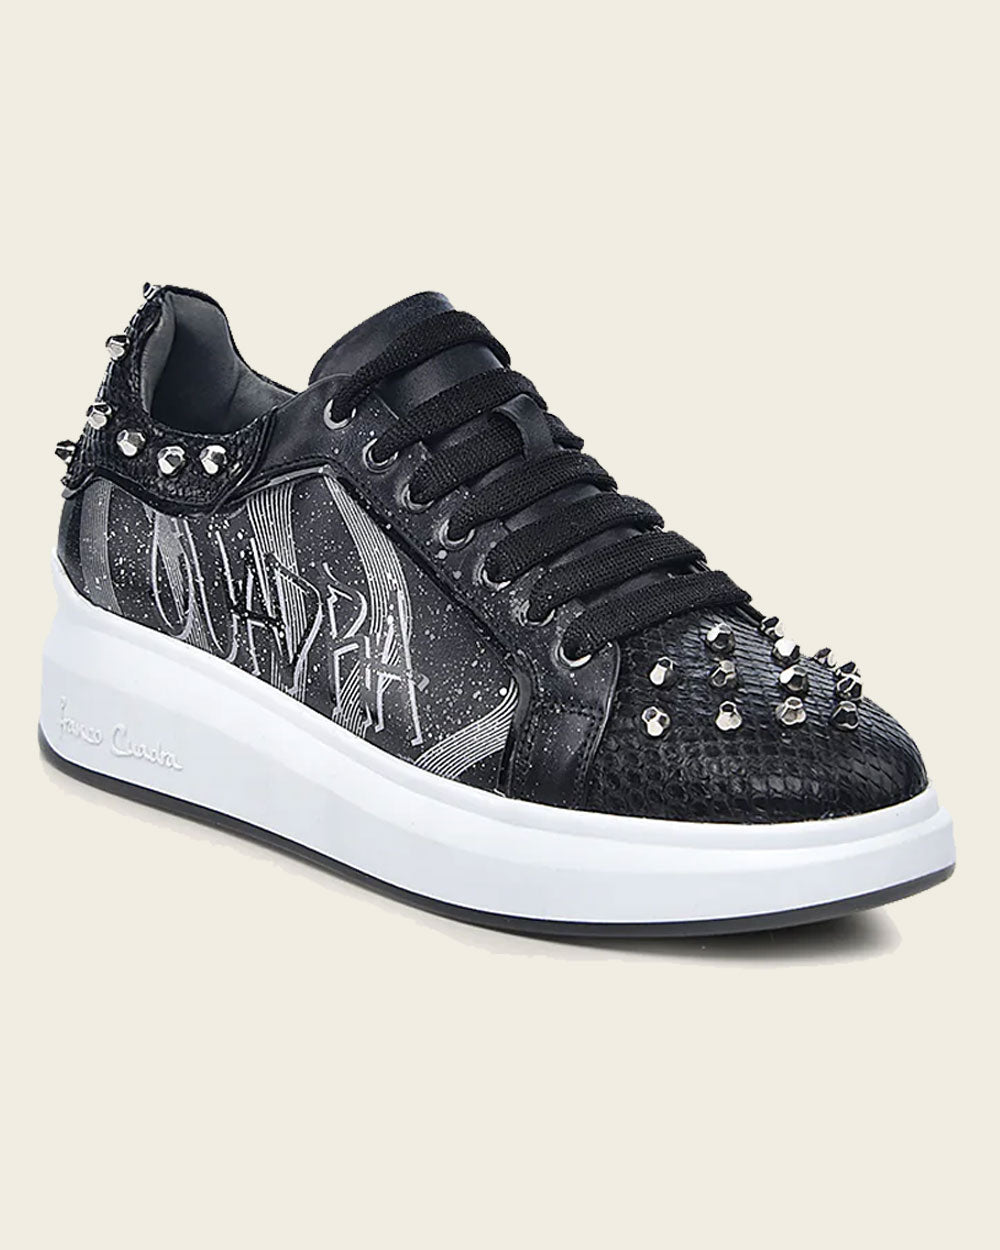 Genuine python black leather sneakers and metallic studs